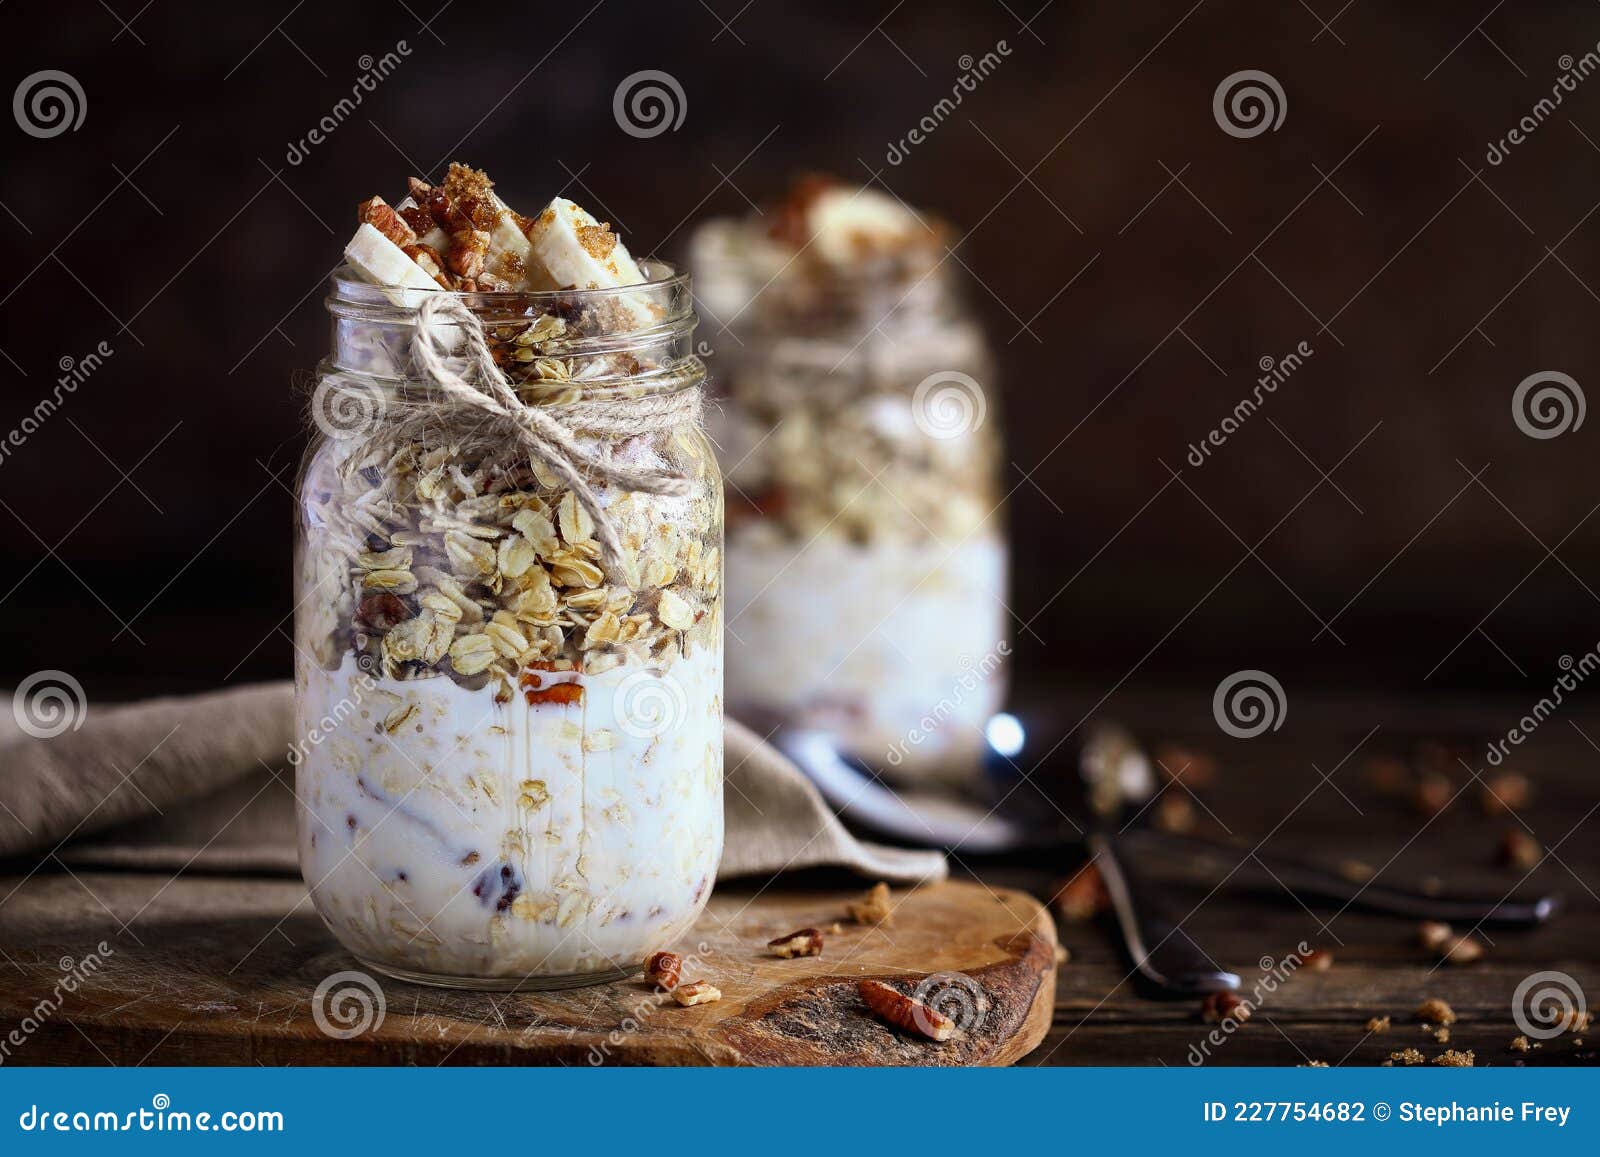 mason jars of overnight oatmeal with bananas and pecan nuts